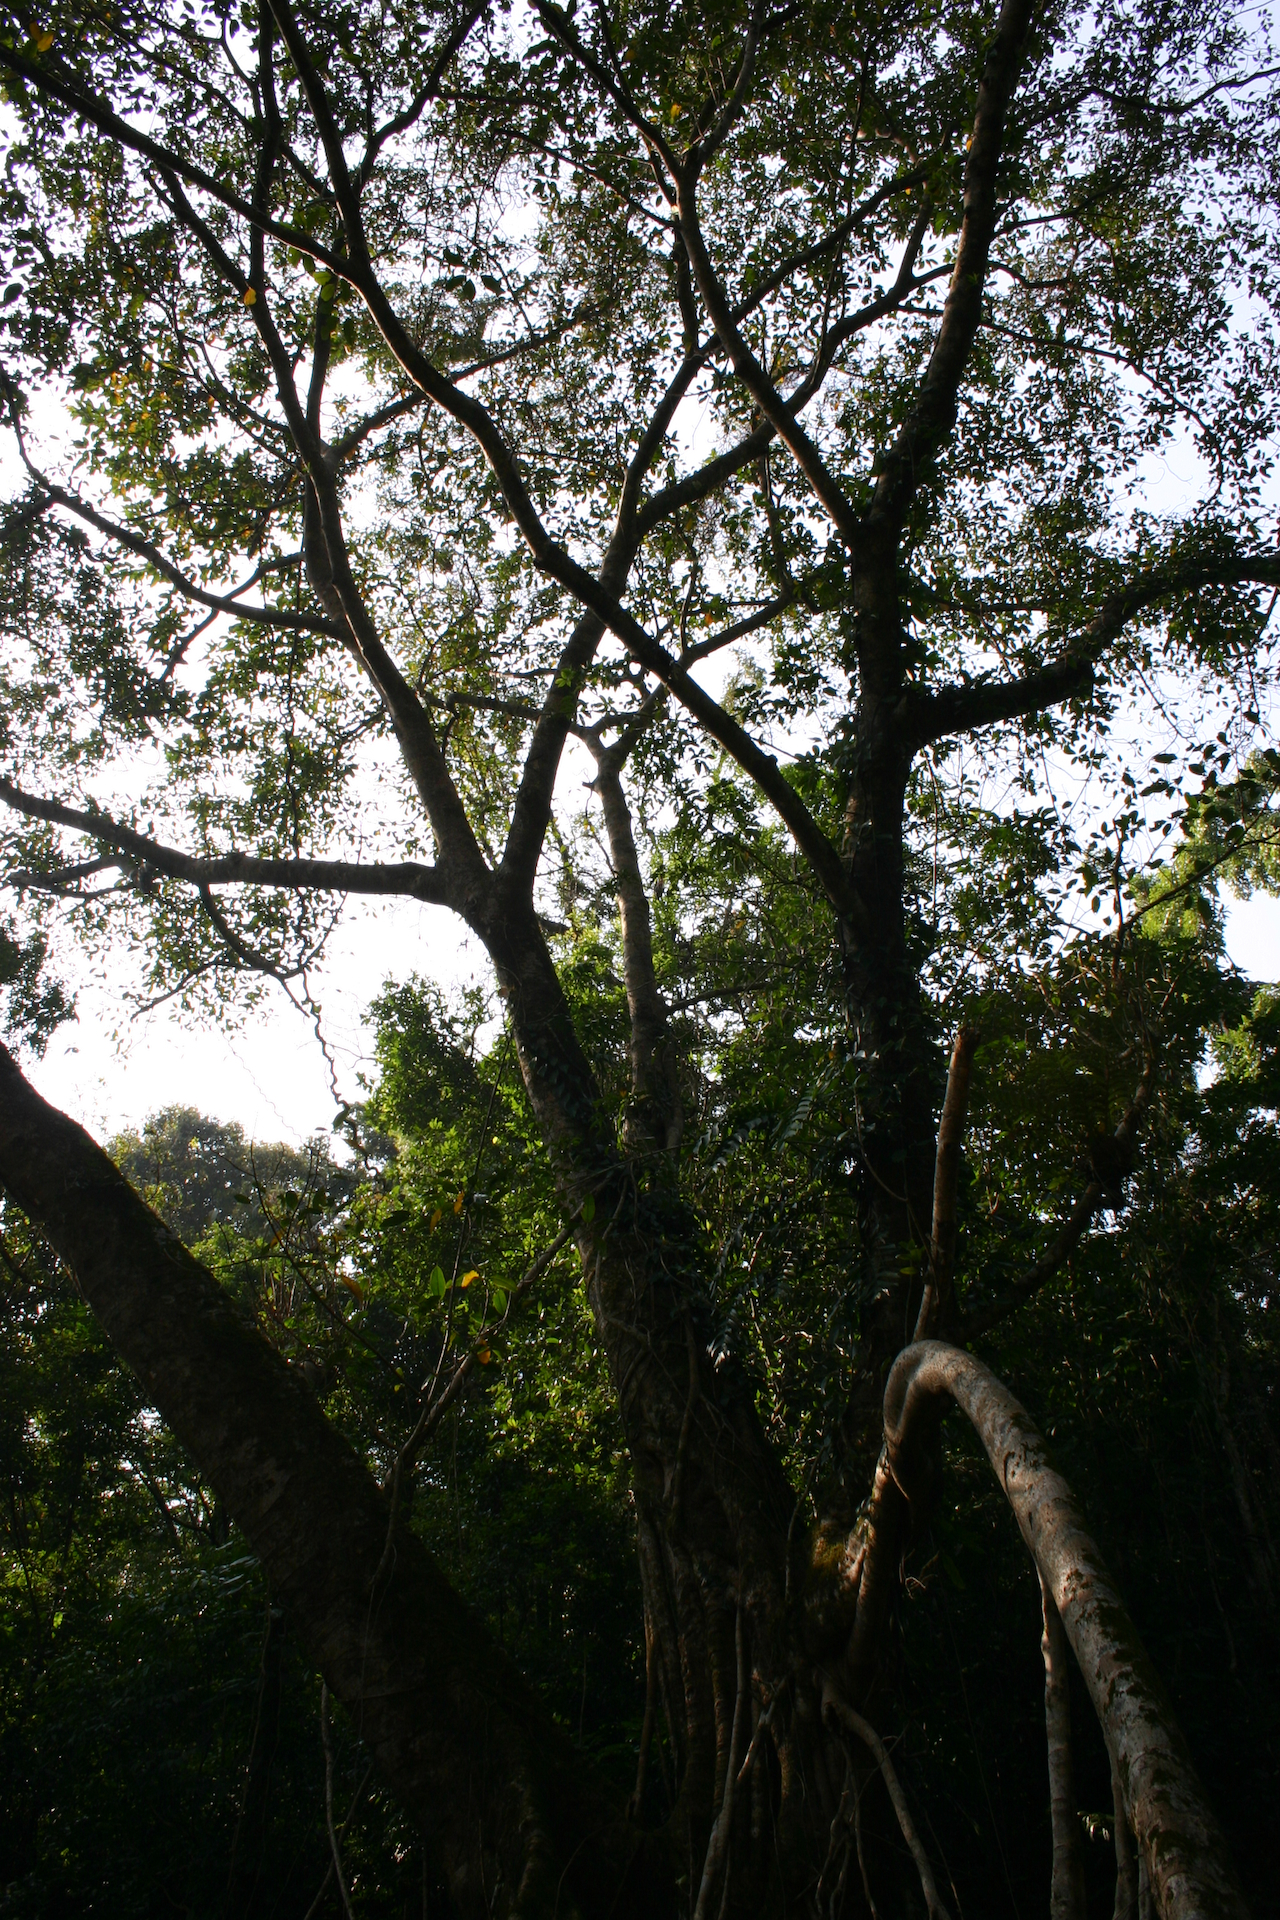 tree nches, with very little green leaves, surround a large open area